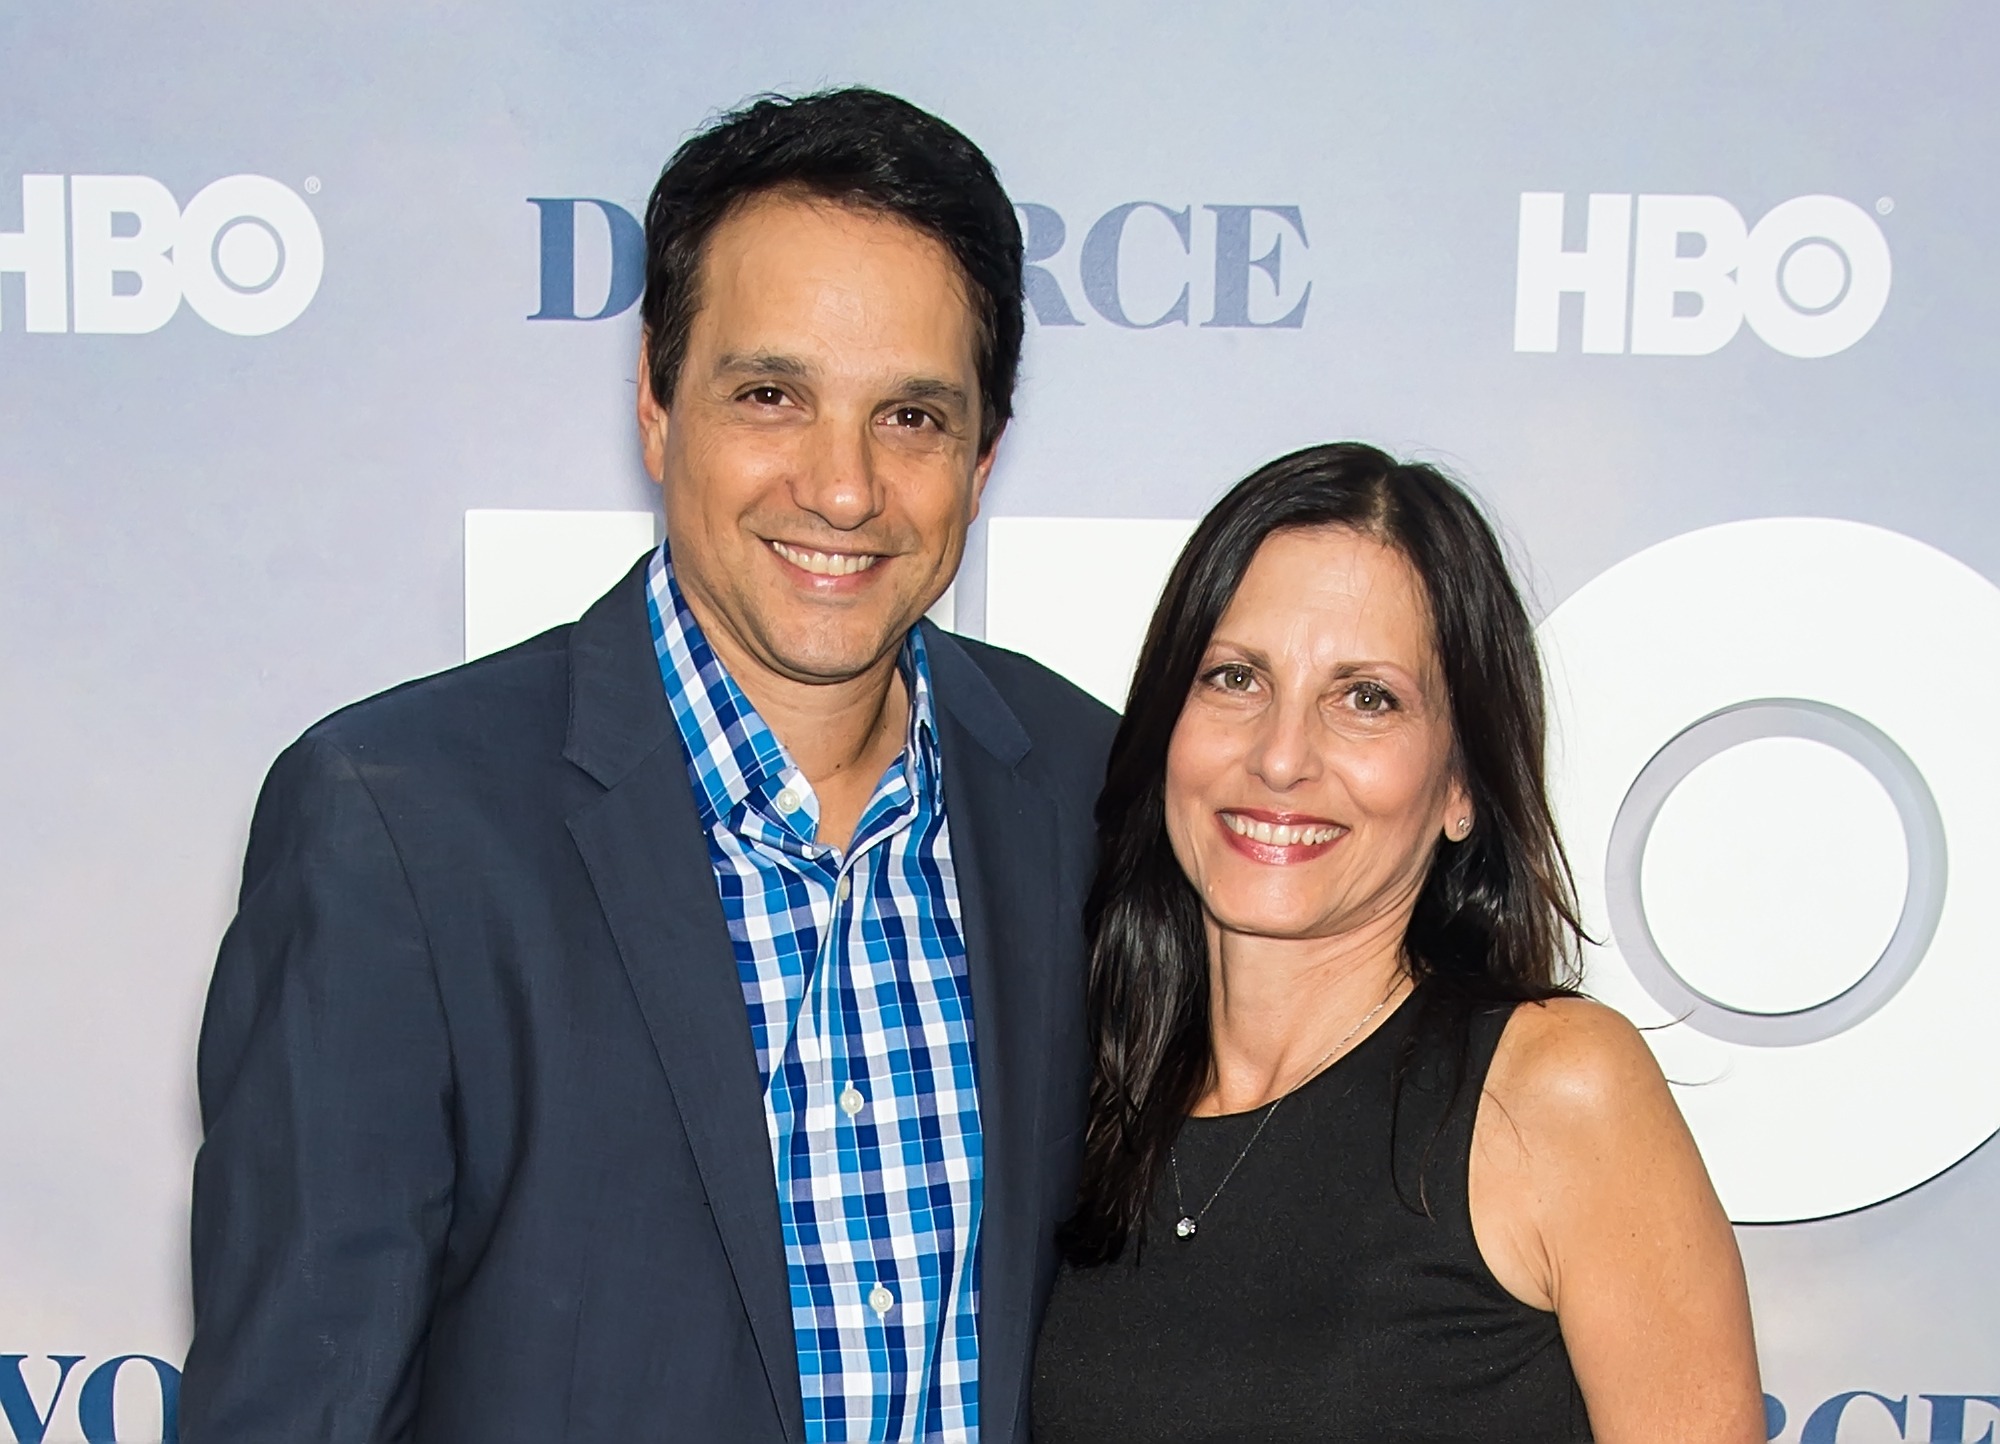 <p>"Cobra Kai" star Ralph Macchio became a household name after he played teenaged martial artist Daniel LaRusso in 1984's "The Karate Kid" at 22. But he was already well-acquainted with the love of his life by that point: He met now-wife Phyllis Fierro, a nurse practitioner, at a cousin's birthday party in his grandmother's basement when he was 15. "This is 1970 or whatever, so this is Cheez Doodles, 7Up, Tootsie Rolls, probably the Ruffles with onion dip," he told People magazine in a 2021 interview. "She was a friend of my cousin, and we just smiled and talked and danced a little. Probably the Hustle!" They married in 1987 and later welcomed two kids. </p>